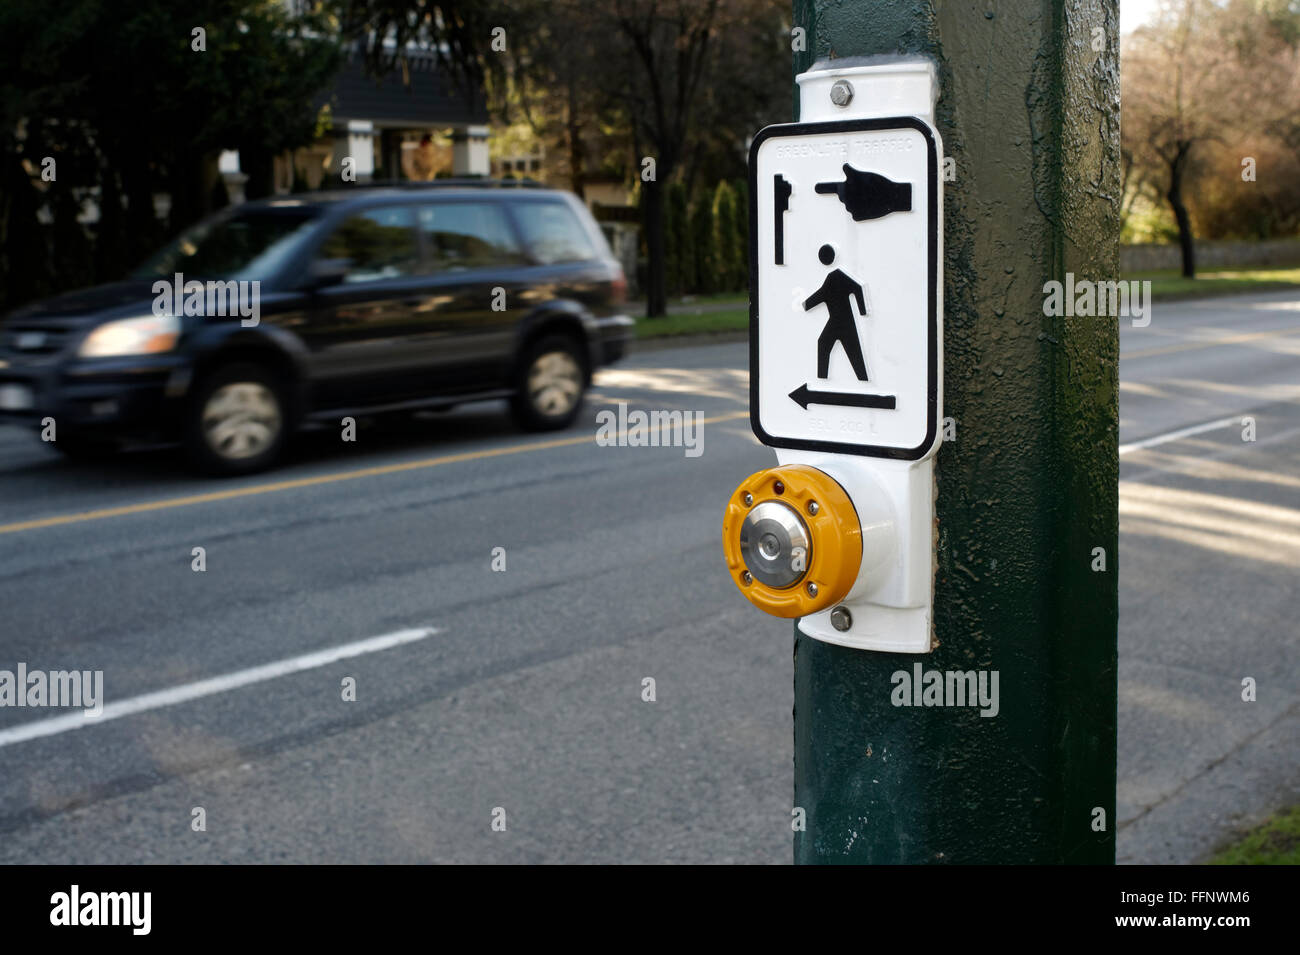 Pedestrian crosswalk signal button with street an SUV in background, Vancouver, BC, Canada Stock Photo